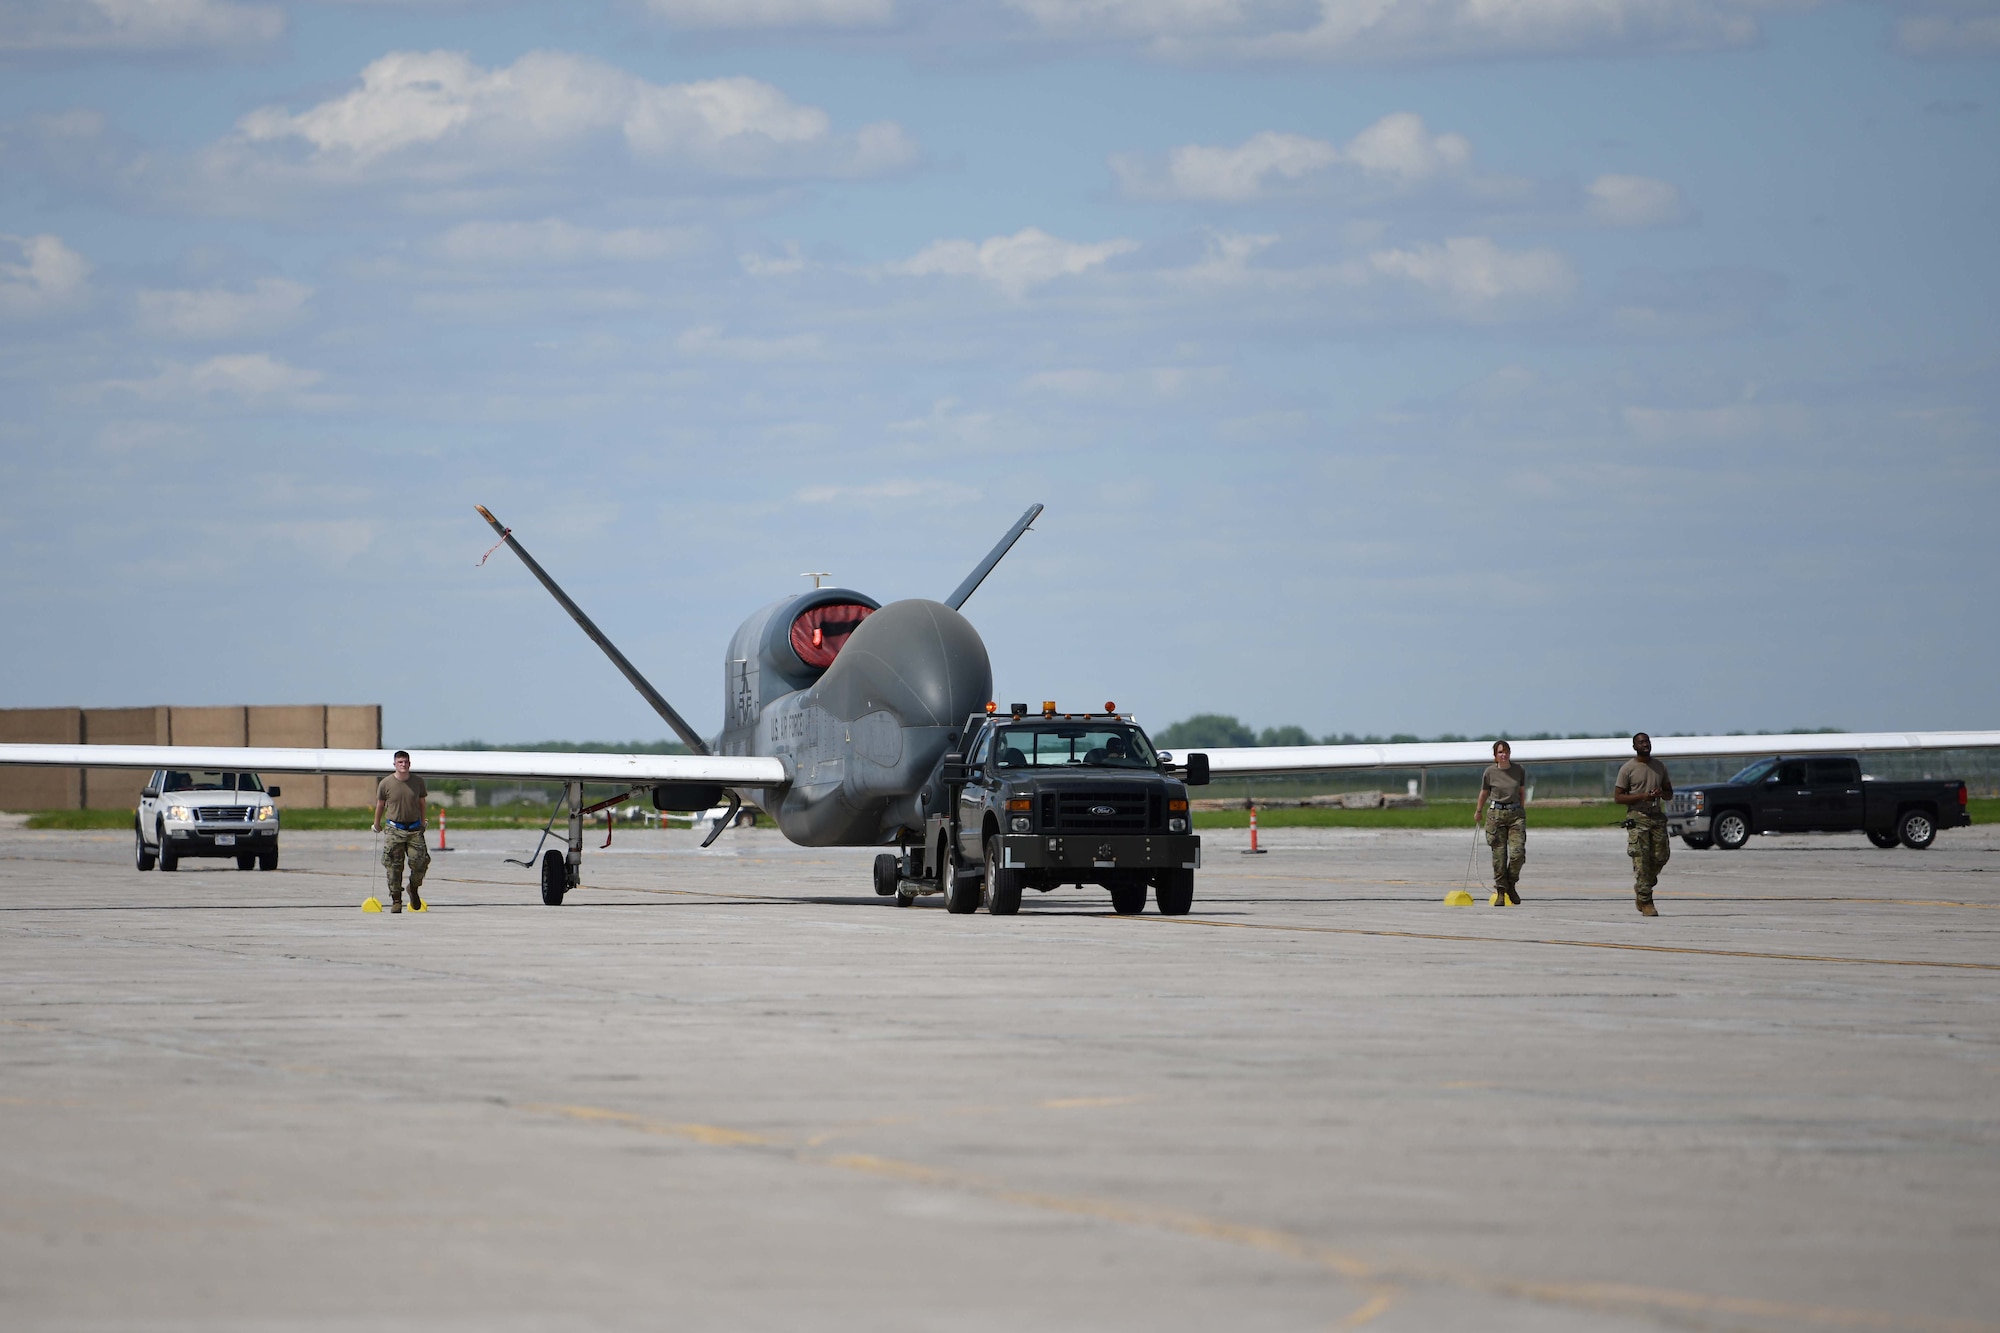 Airmen assigned to the 319th Aircraft Maintenance Squadron from Grand Forks Air Force Base, North Dakota, tow an RQ-4 Block 30 Global Hawk remotely piloted aircraft June 6, 2022, across the Grand Forks Air Force Base flight line to Northrop Grumman at Grand Sky. The RQ-4 Block 30 divestment is a part of the U.S. Air Force’s plan to restructure intelligence, surveillance and reconnaissance to meet national defense priorities and support joint all-domain command and control capabilities. Located on Grand Forks Air Force Base, Grand Sky is a business and aviation park focused on developing and growing the unmanned aerial systems industry. (U.S. Air Force photo by Senior Airman Ashley Richards)